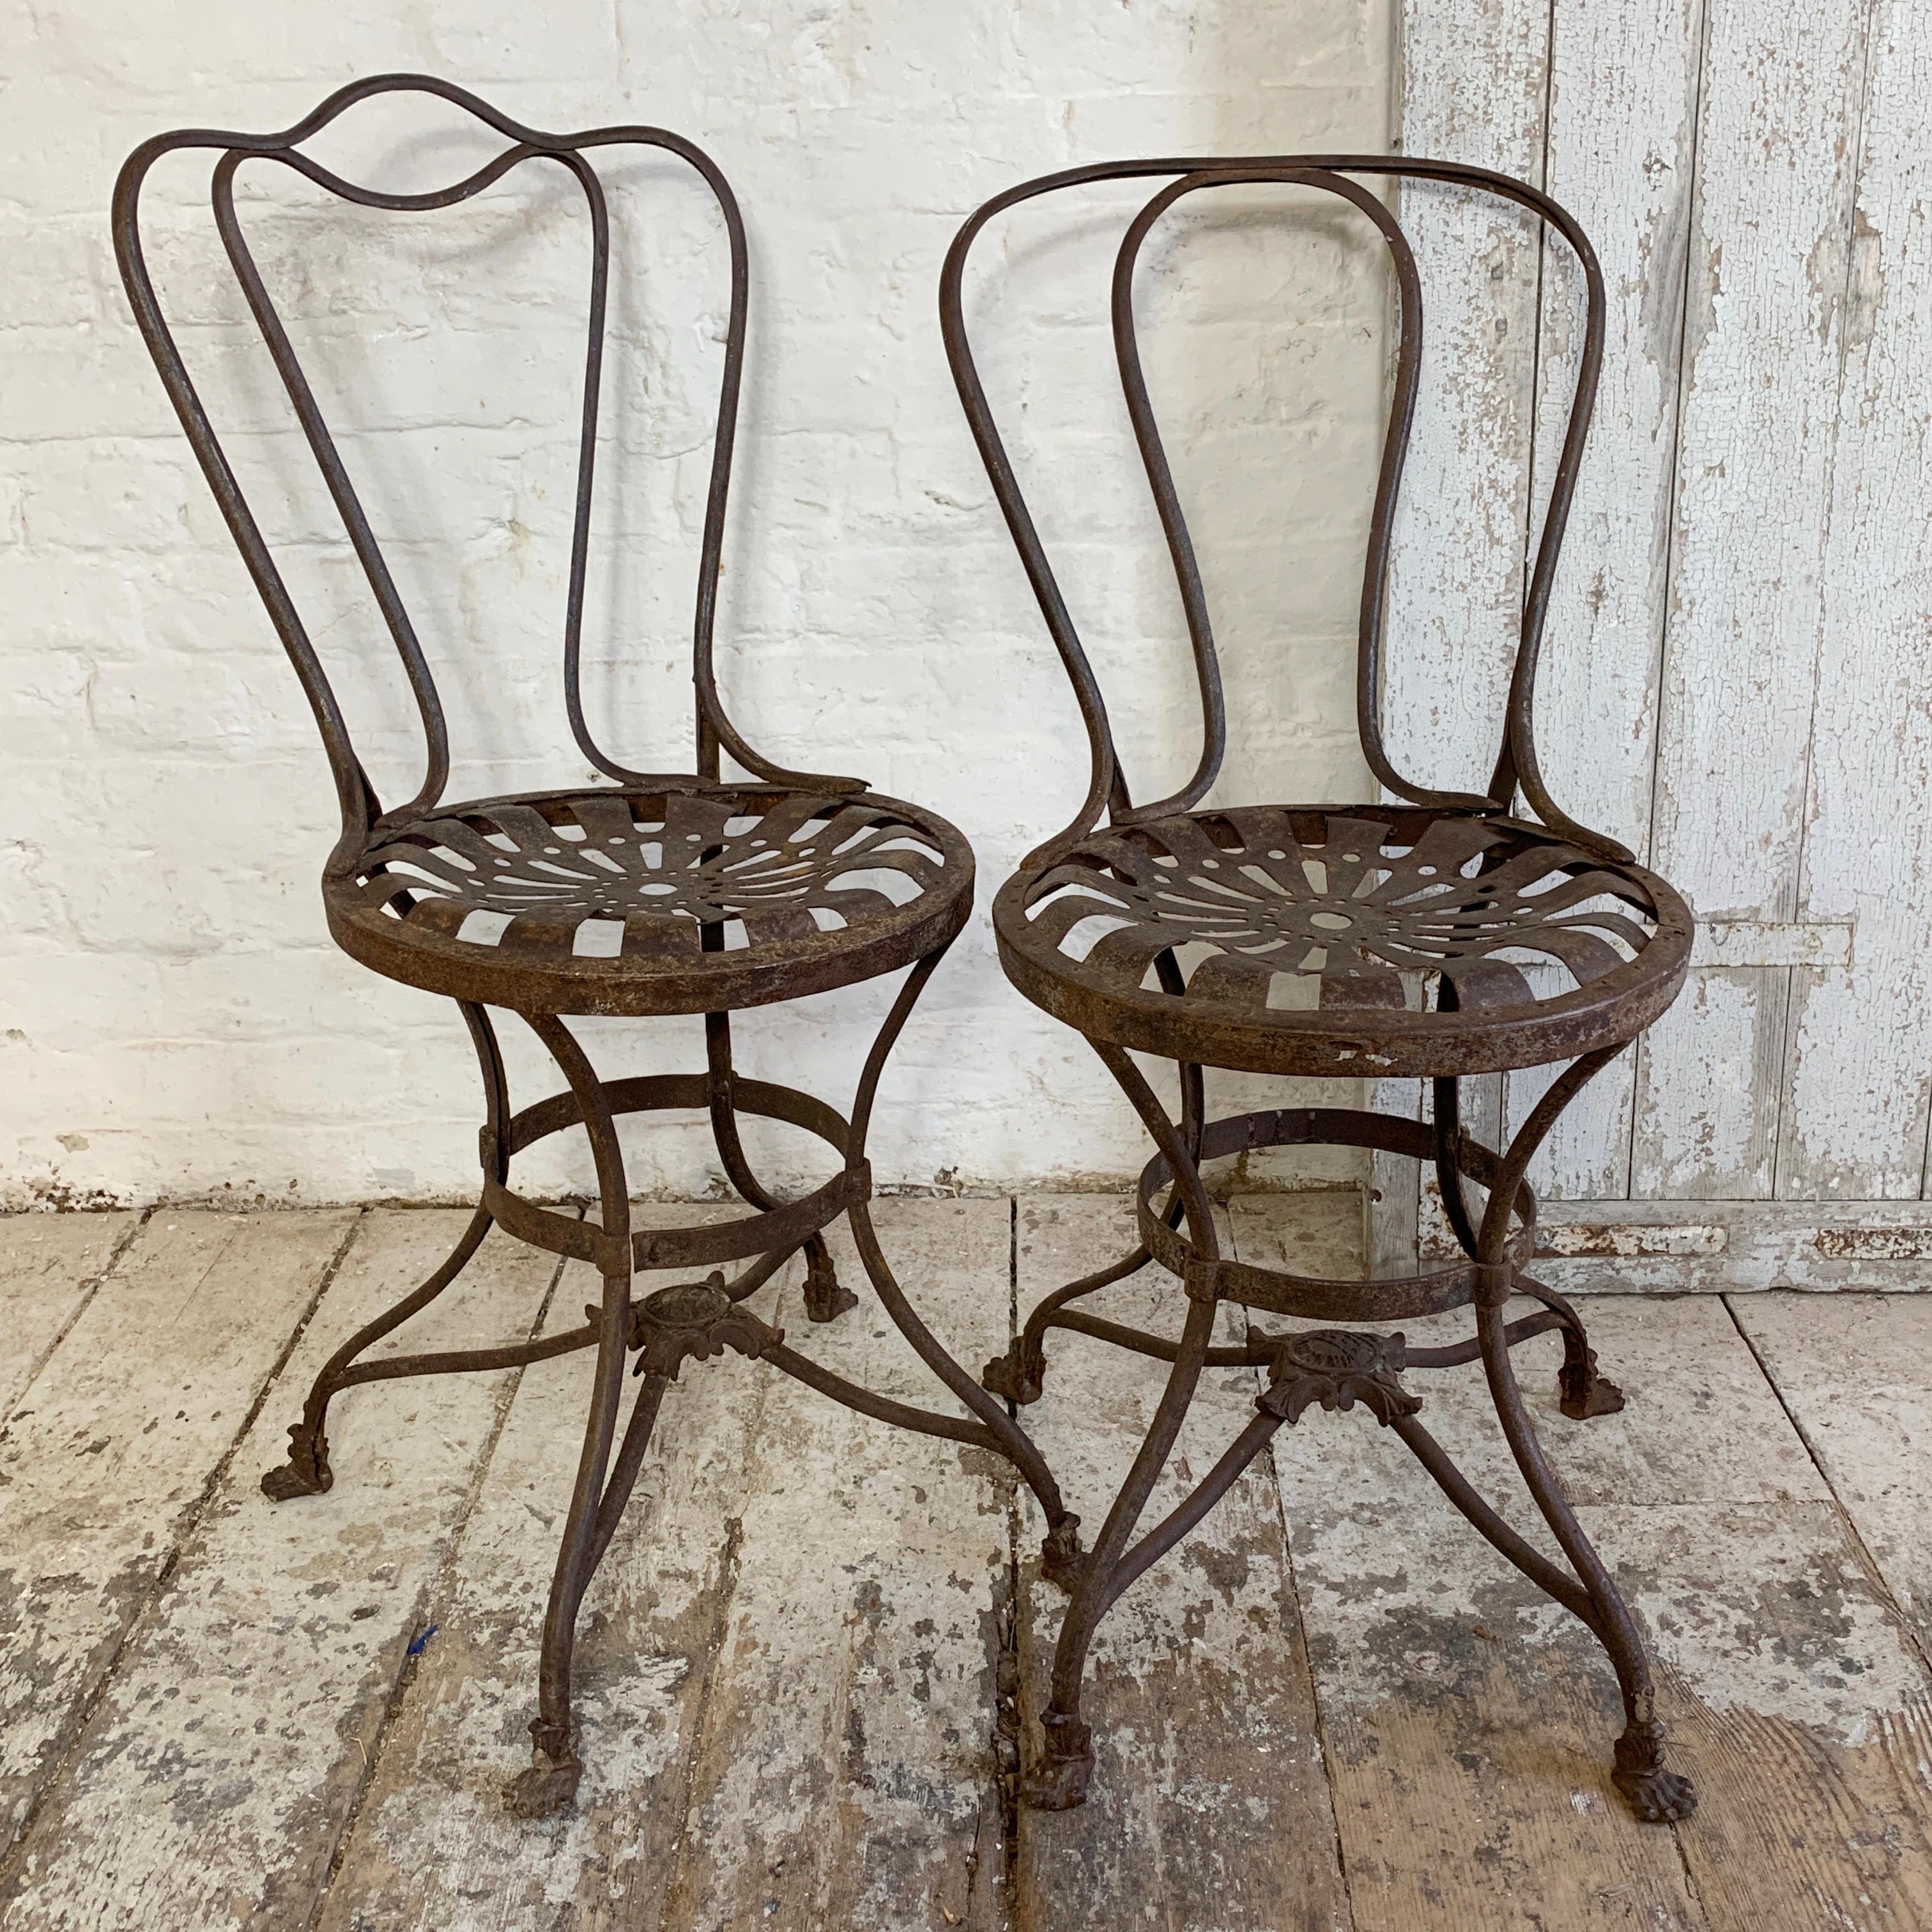 Late 19th Century French Grassin Arras Garden Chairs 1